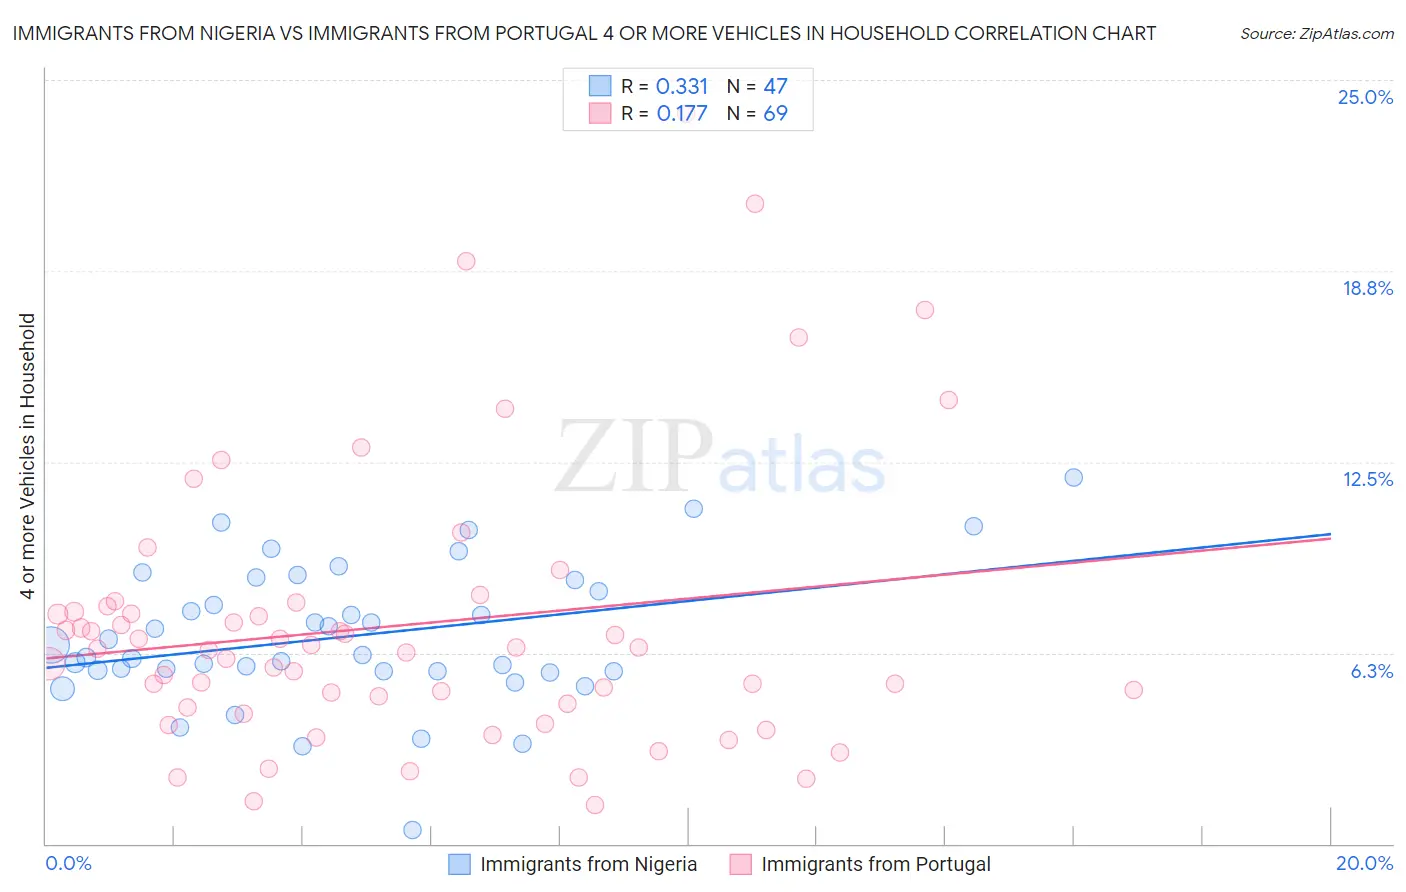 Immigrants from Nigeria vs Immigrants from Portugal 4 or more Vehicles in Household